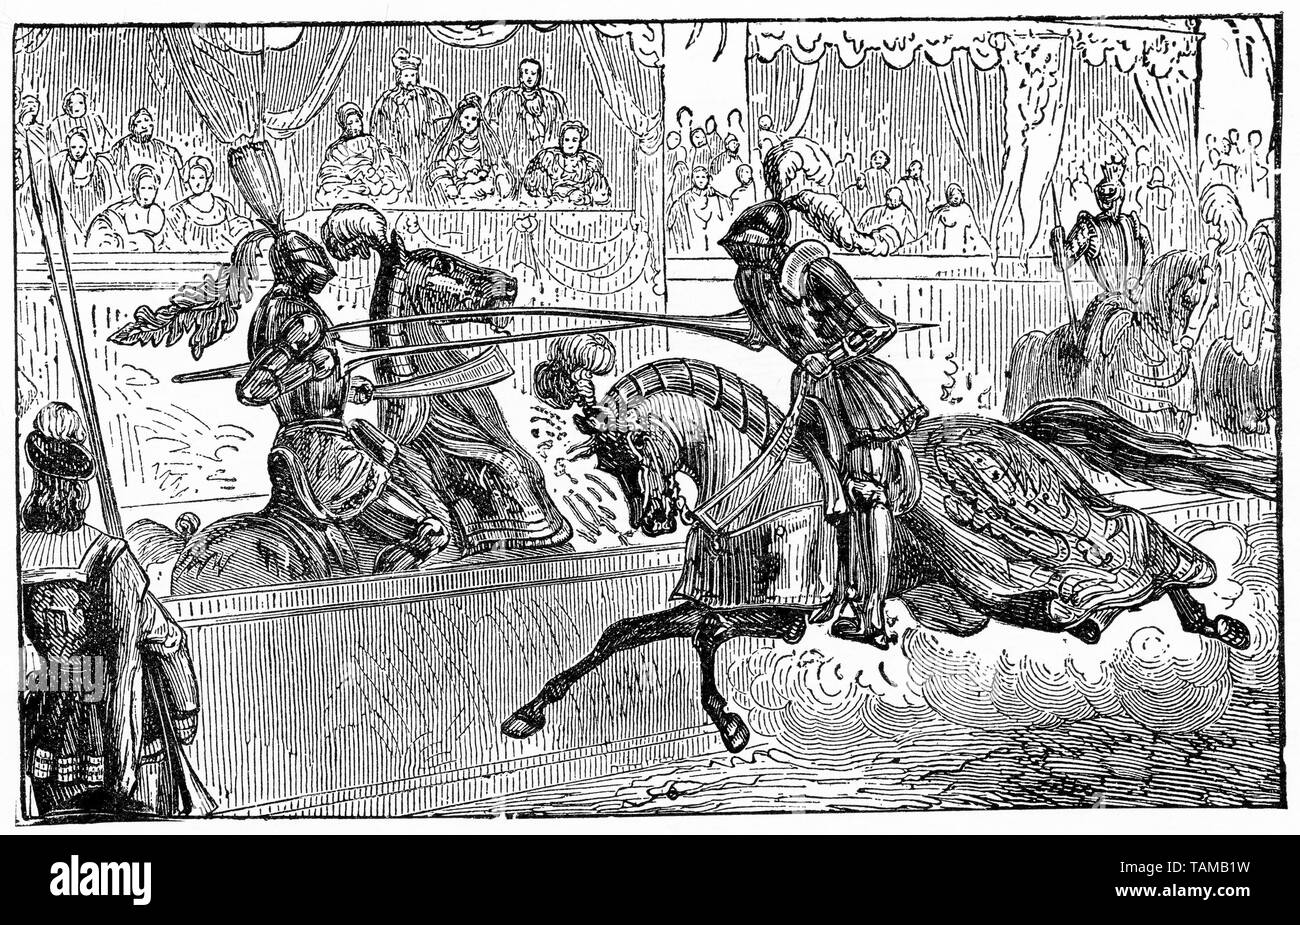 Engraving of two knights in armour jousting at the lists. Stock Photo